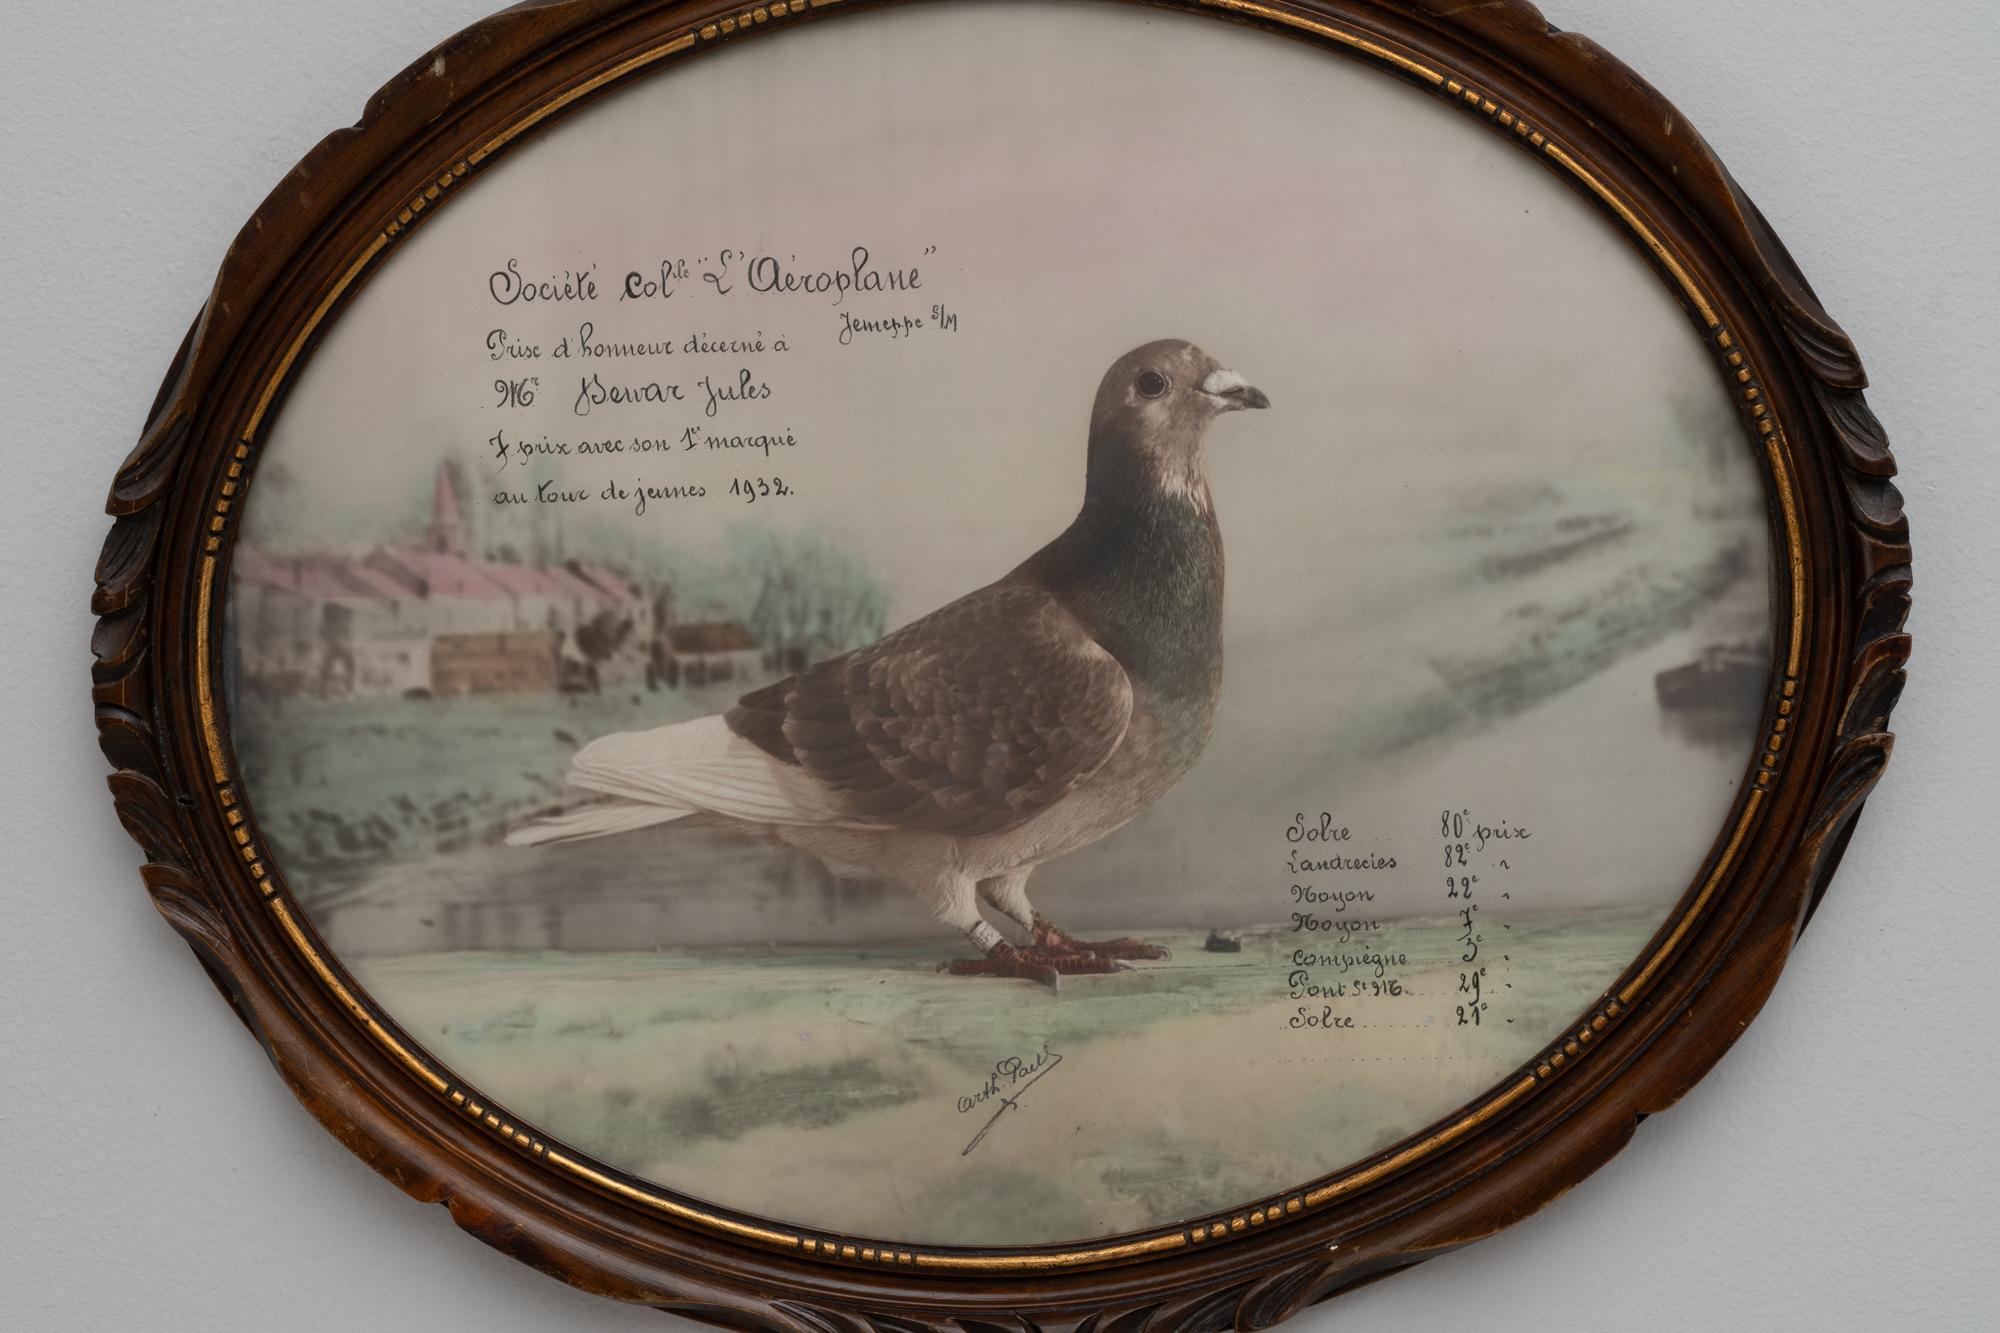 This 20th Century Belgian artwork, beautifully encased in an oval wooden frame, exudes a sense of nostalgia and natural elegance. The painting showcases a solitary pigeon, portrayed with such realistic detail that it seems almost poised to take